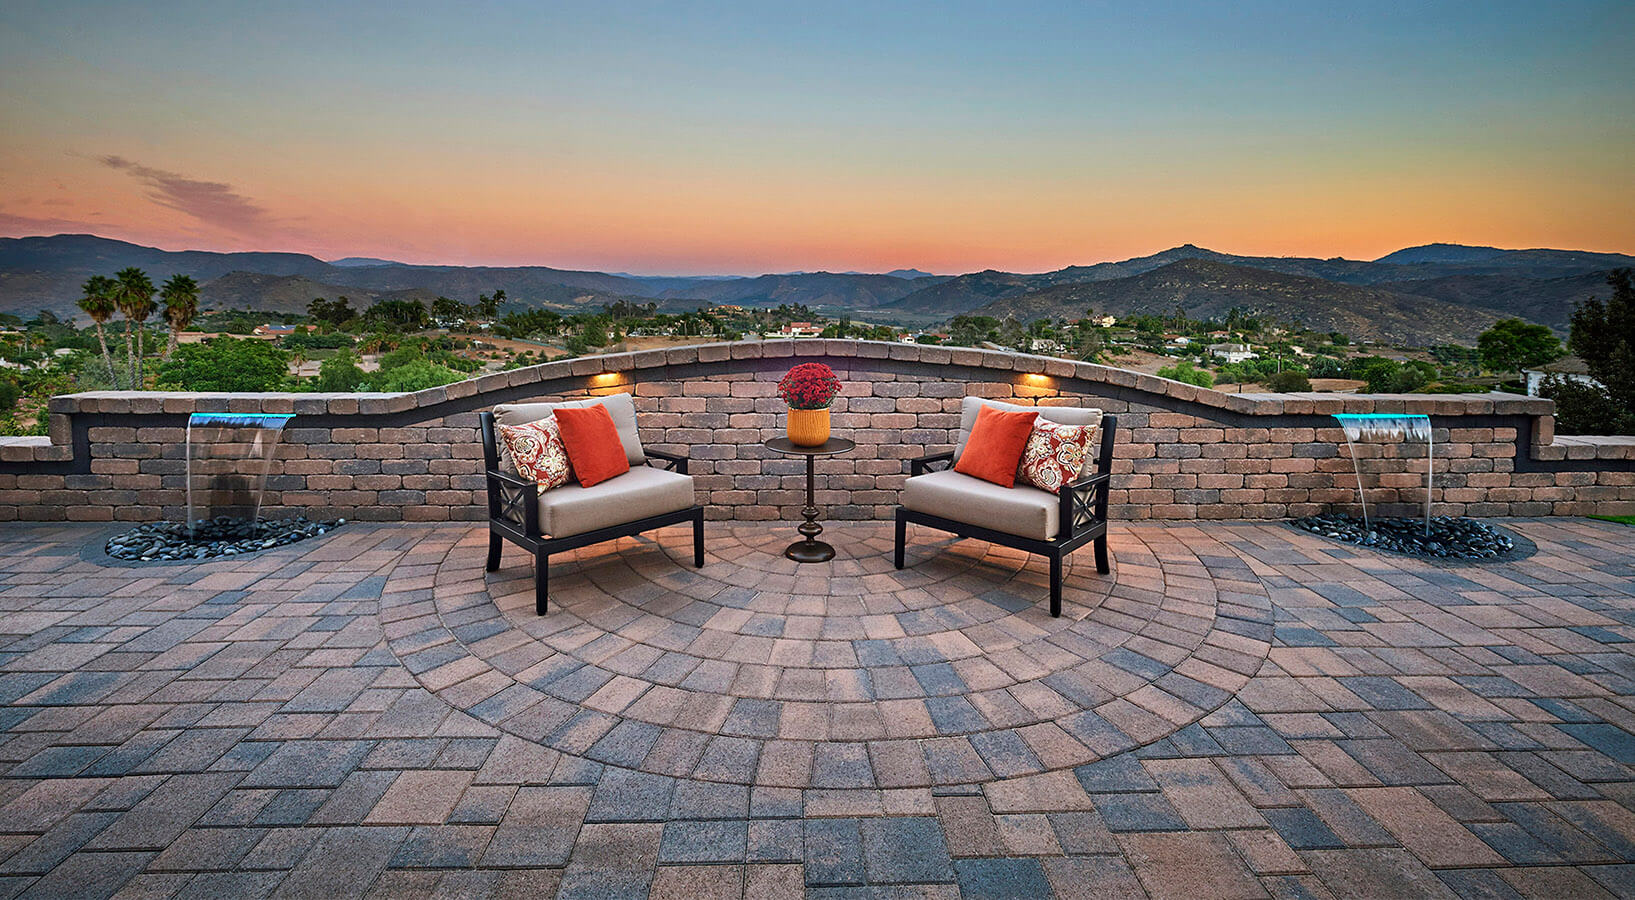 Patio and ledge with pavers, chairs and water features overlooking mountains at sunset